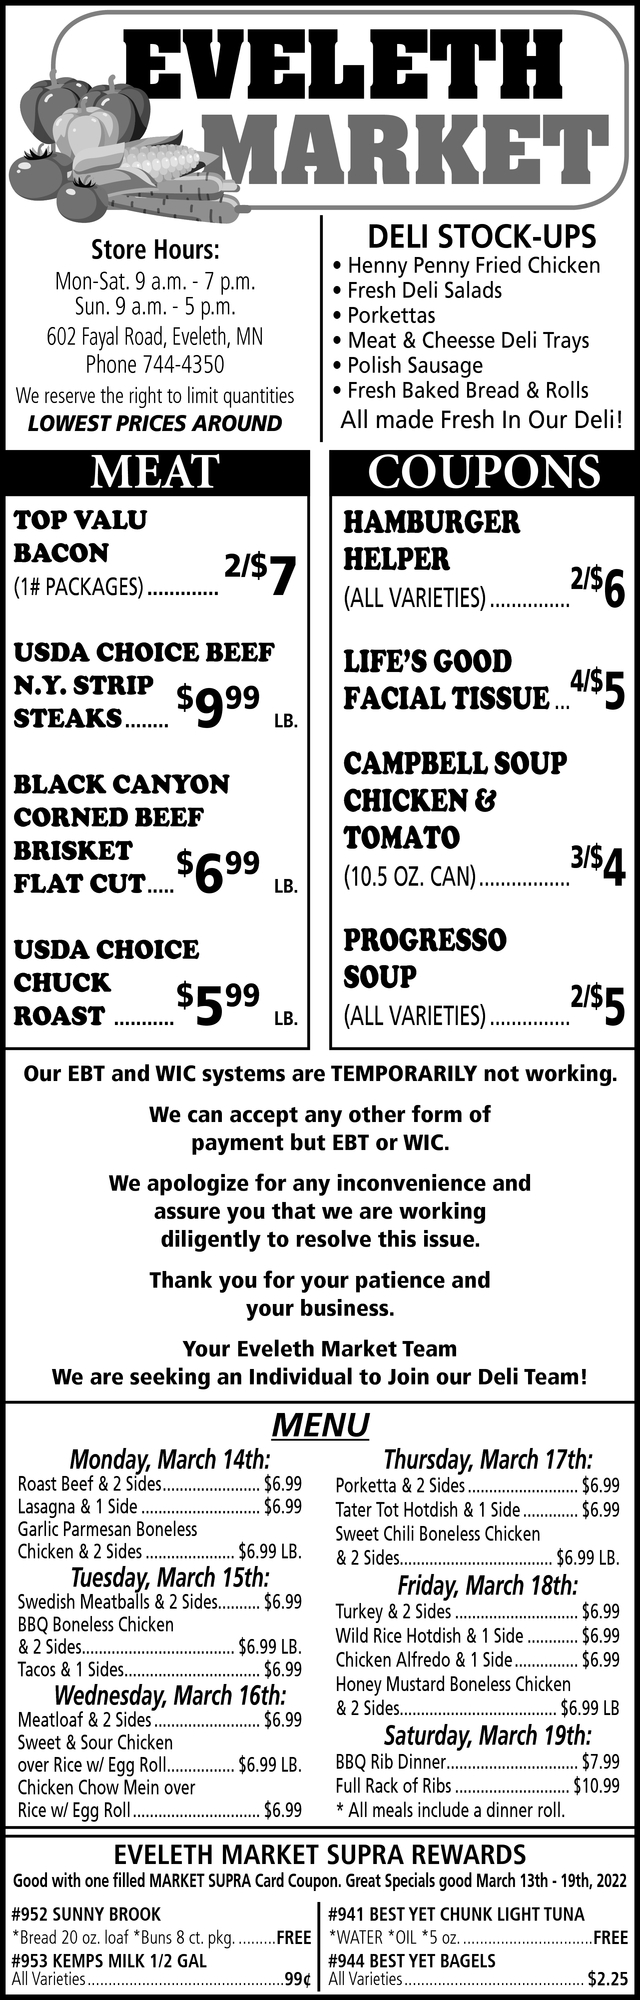 Meat - Coupons